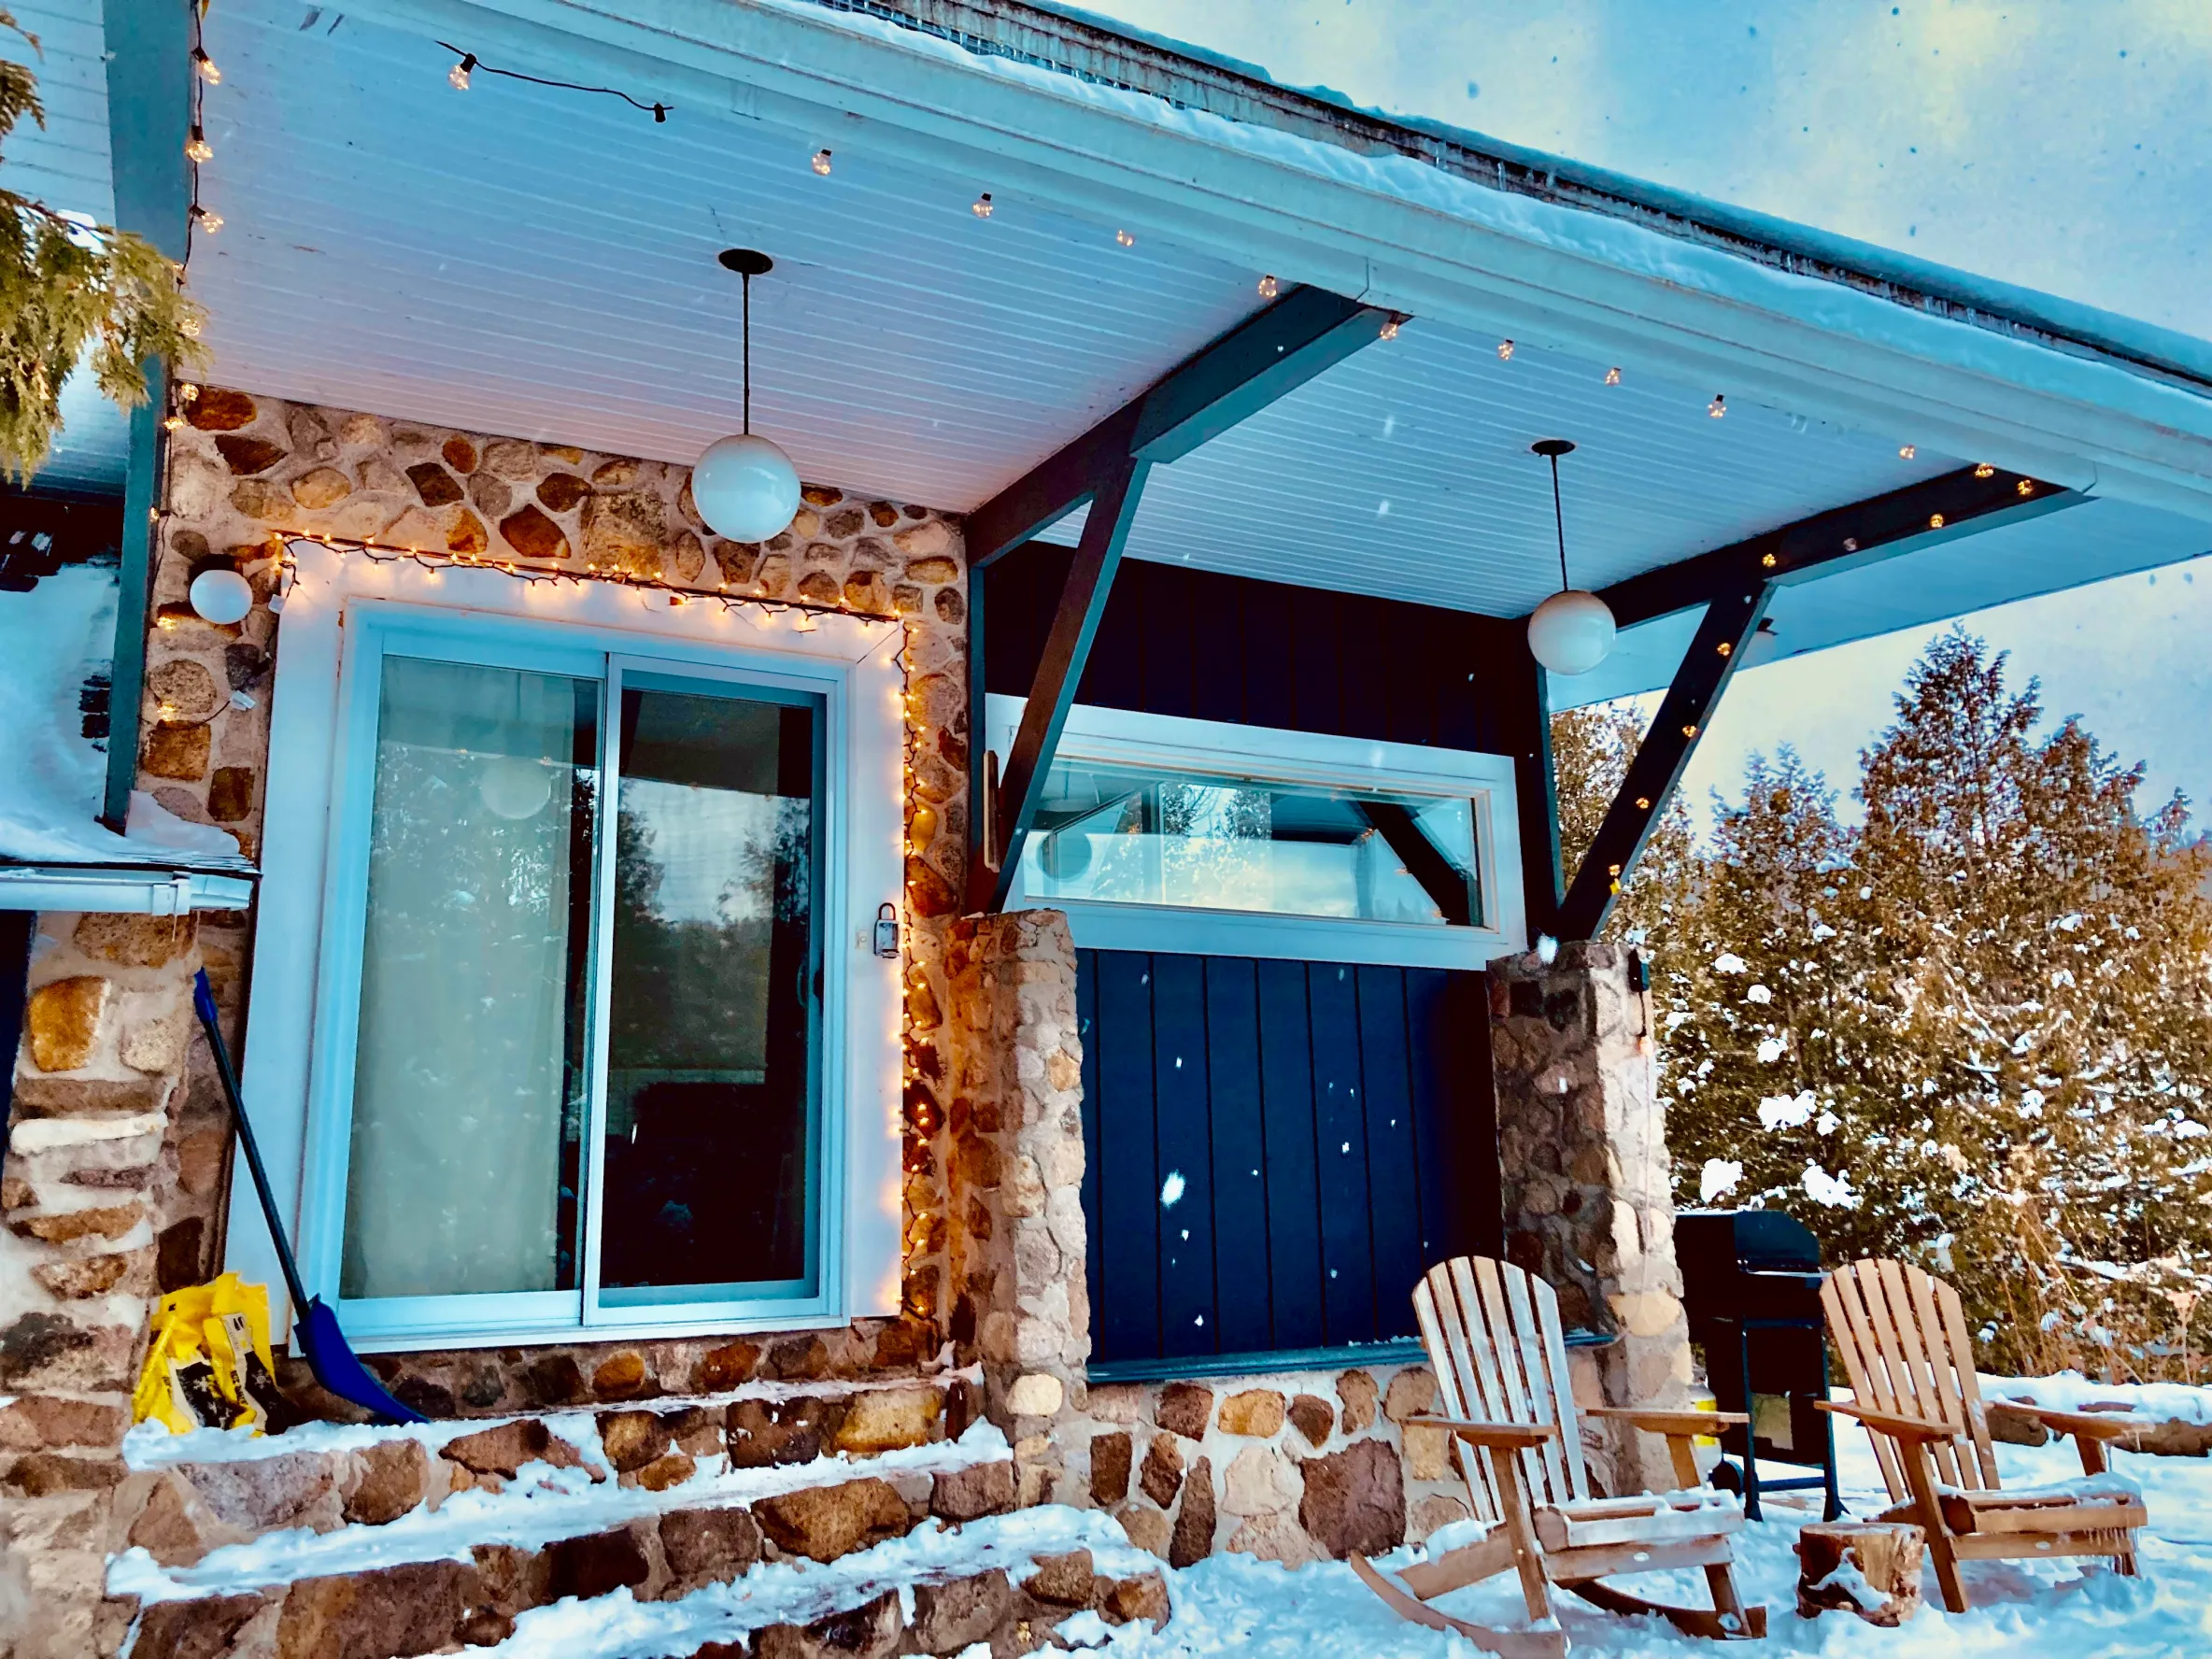 The side door view of a chalet as the snow falls. Two Adirondack chairs sit next to stony steps leading up to a sliding glass door.  